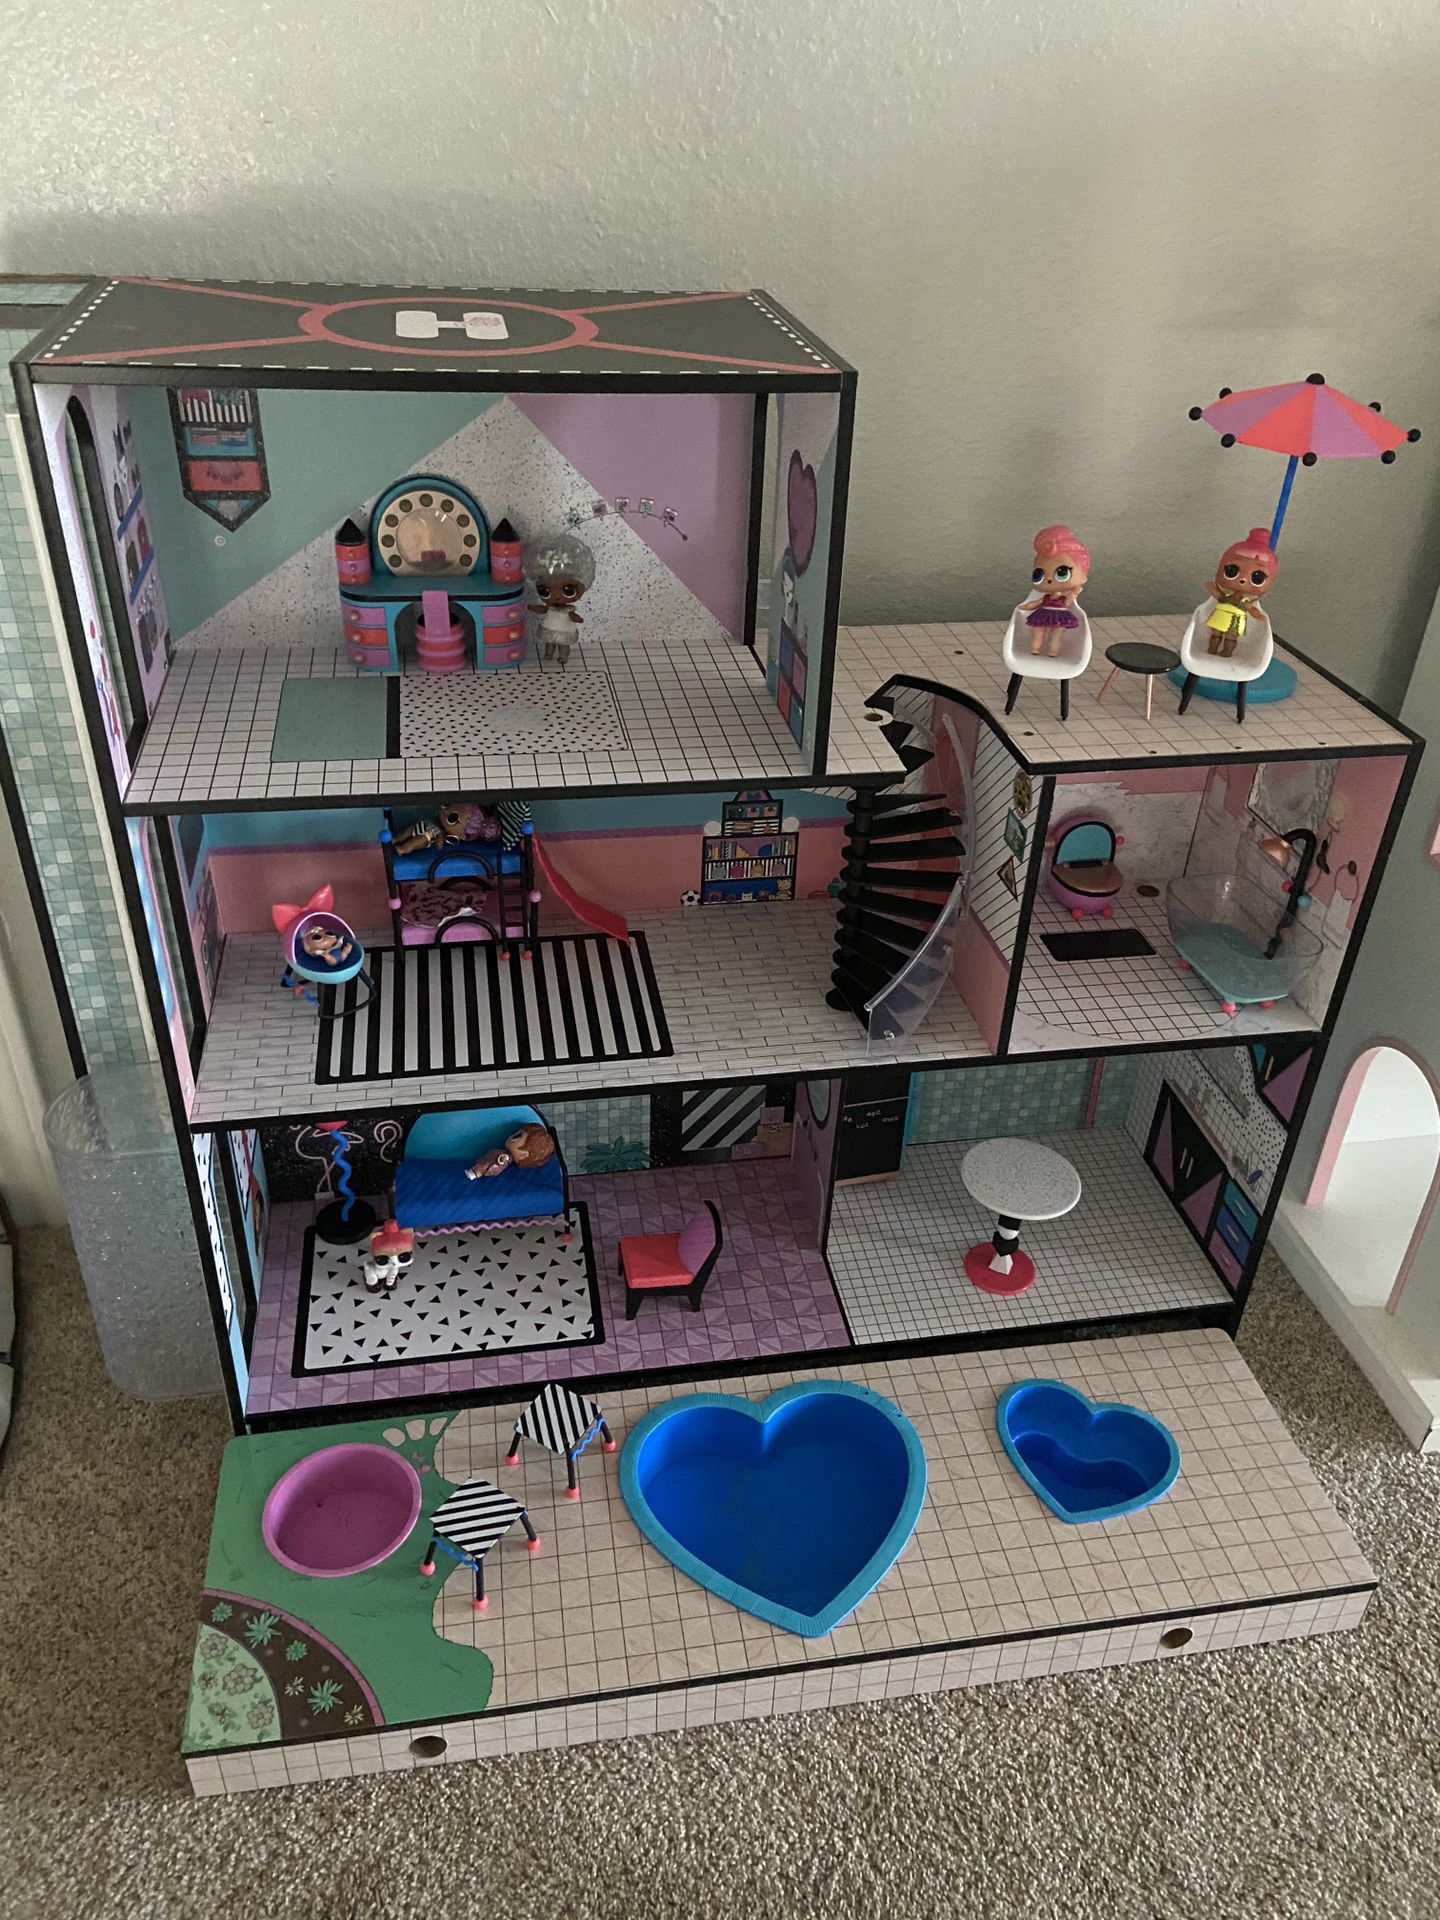 LOL O.M.G Doll house with accessories and LOL dolls and pets